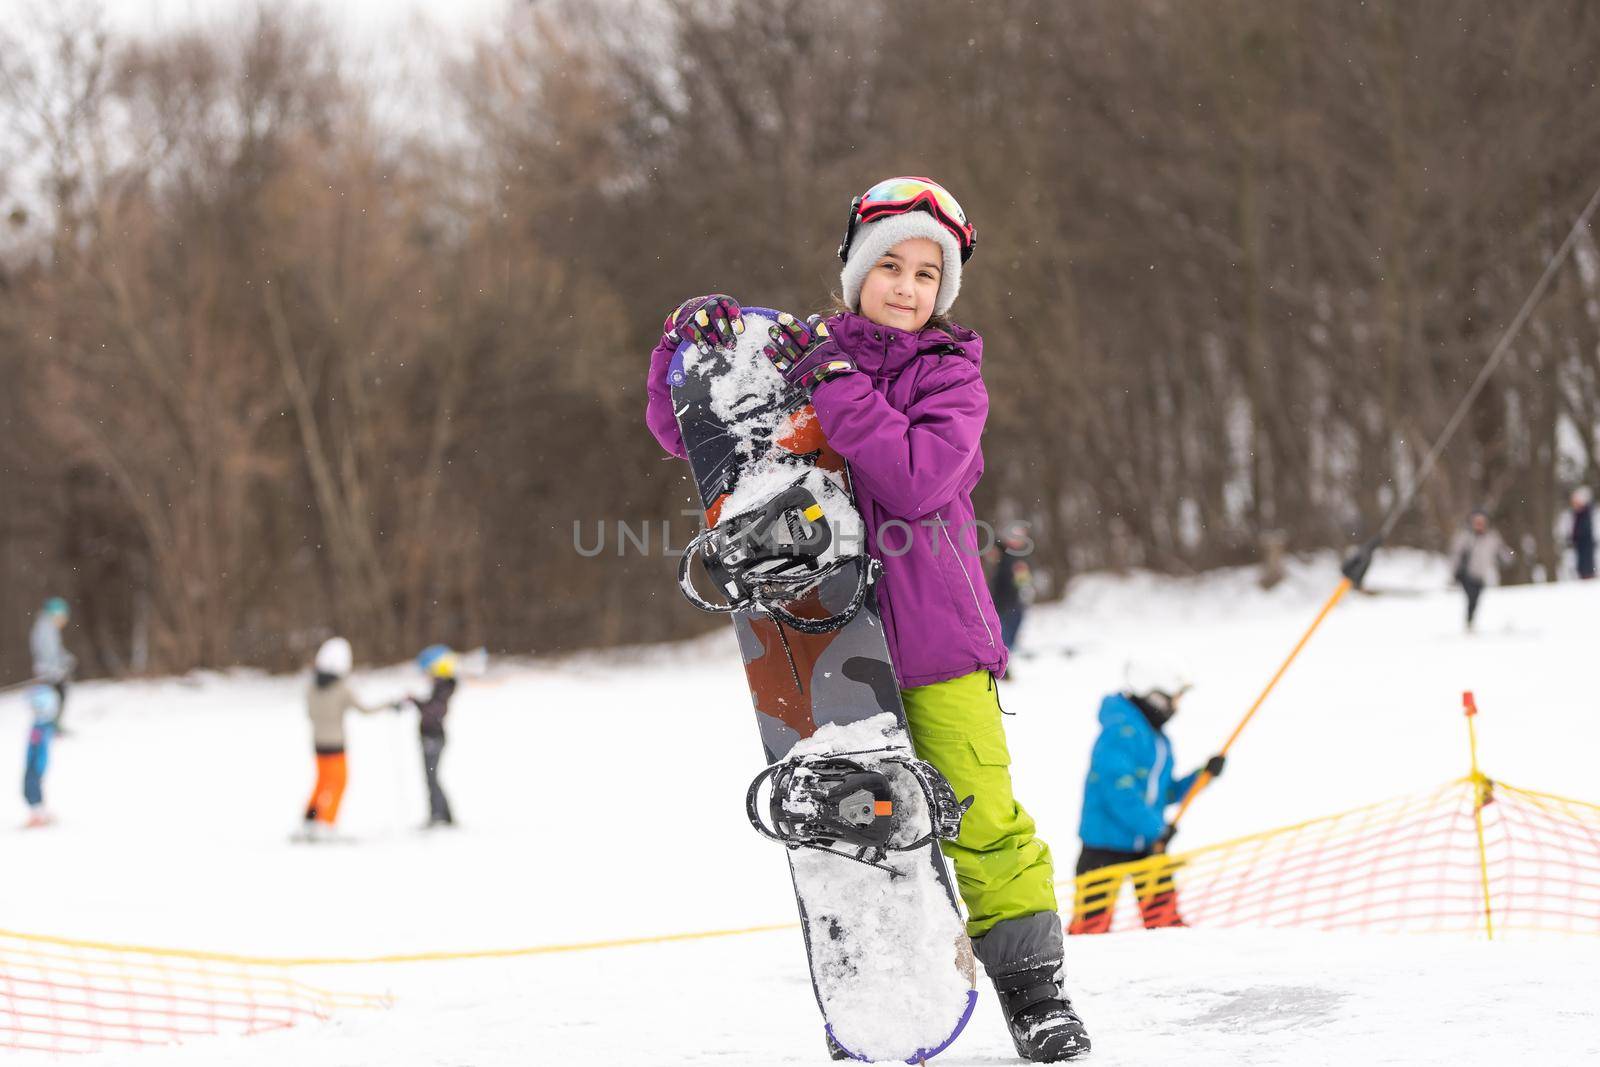 little cute girl learning to ride a children's snowboard, winter sports for the child, safety of active sports